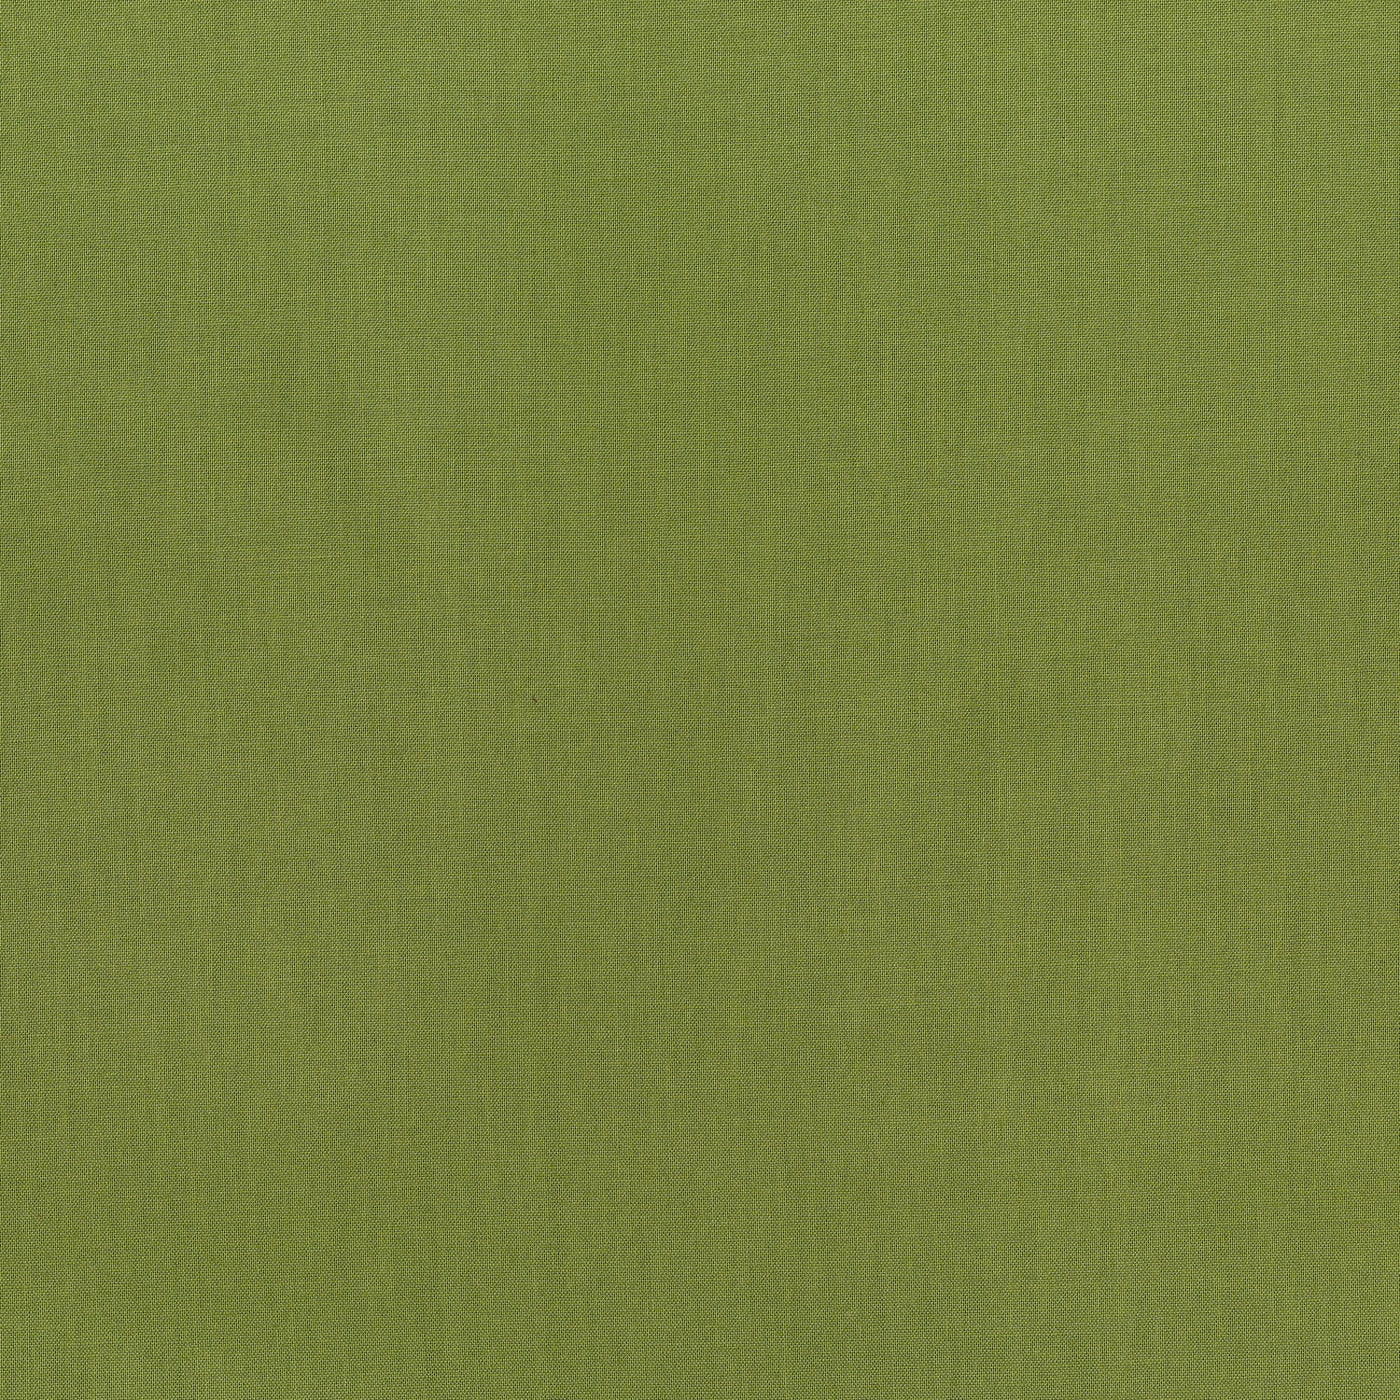 Cotton Supreme Solids in Bowood Green 9617-267